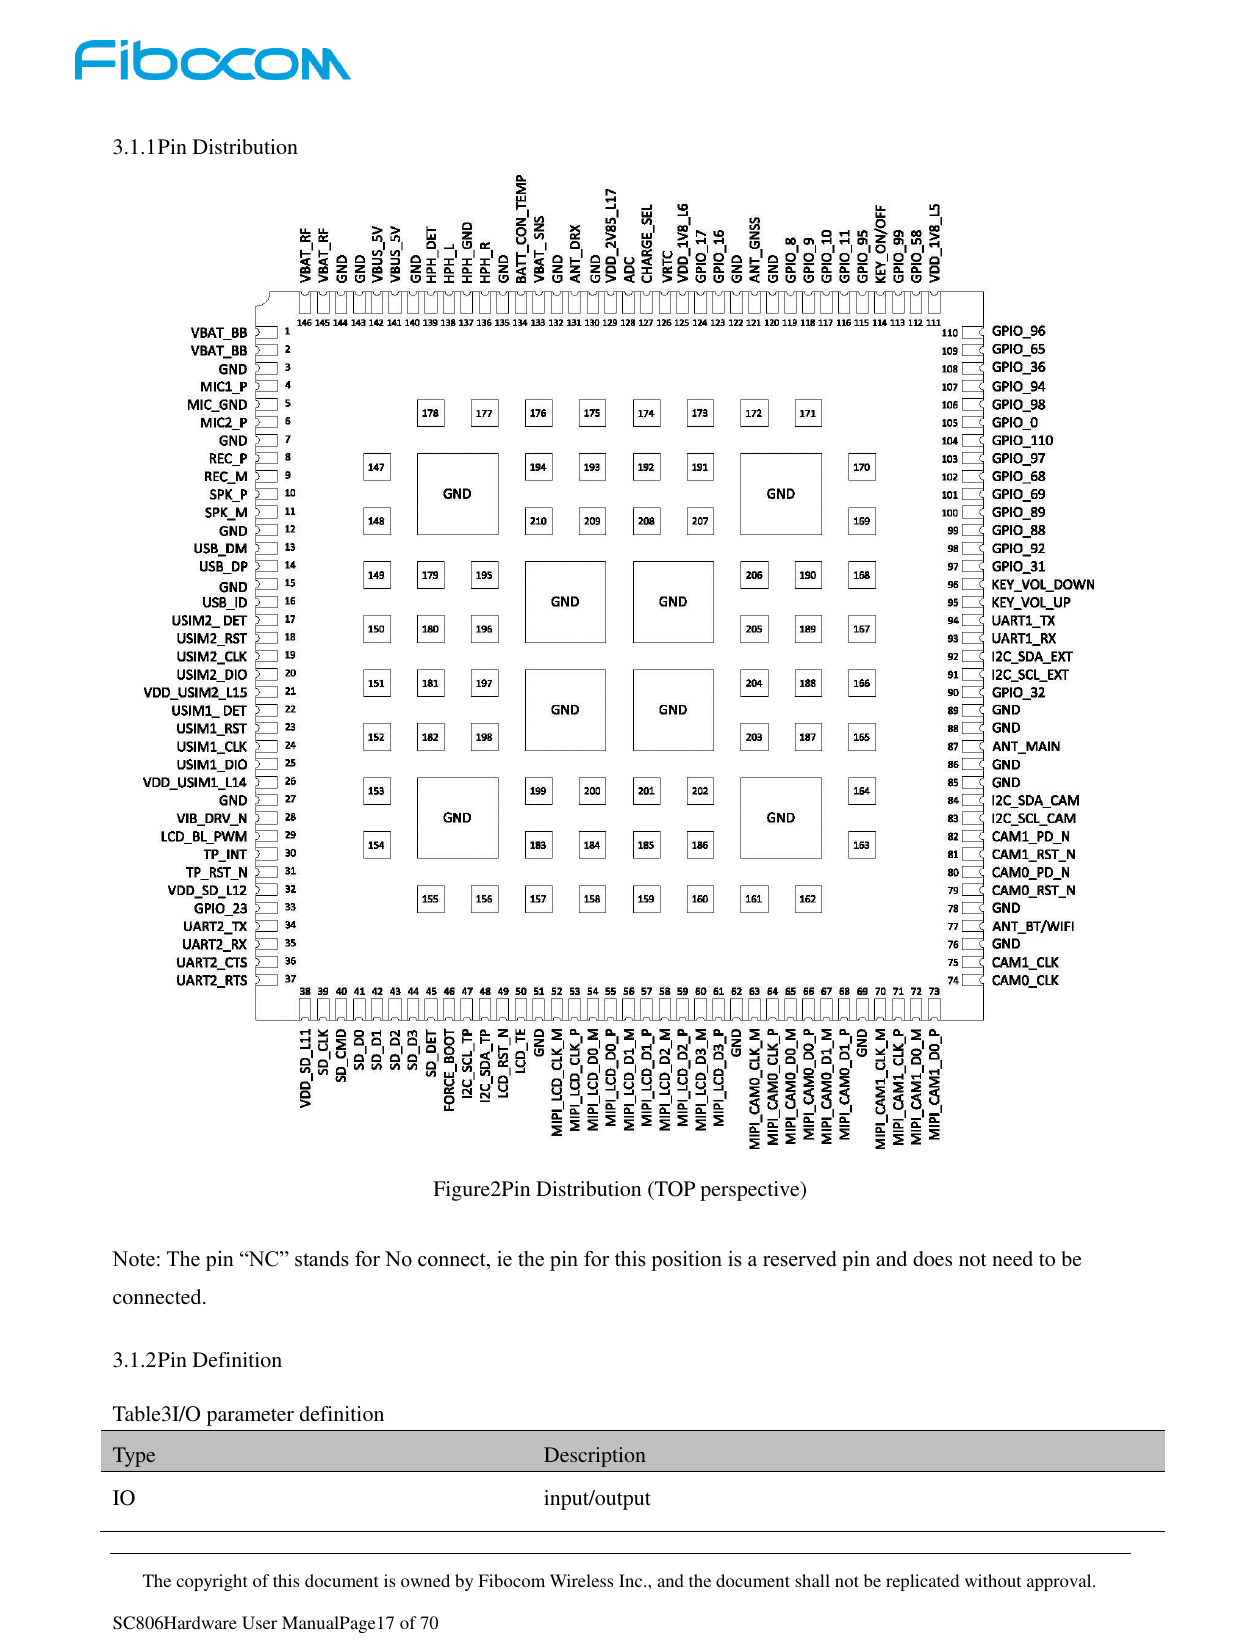     The copyright of this document is owned by Fibocom Wireless Inc., and the document shall not be replicated without approval.   SC806Hardware User ManualPage17 of 70 3.1.1 Pin Distribution  Figure2Pin Distribution (TOP perspective)  Note: The pin “NC” stands for No connect, ie the pin for this position is a reserved pin and does not need to be connected. 3.1.2 Pin Definition Table3I/O parameter definition Type Description IO input/output 